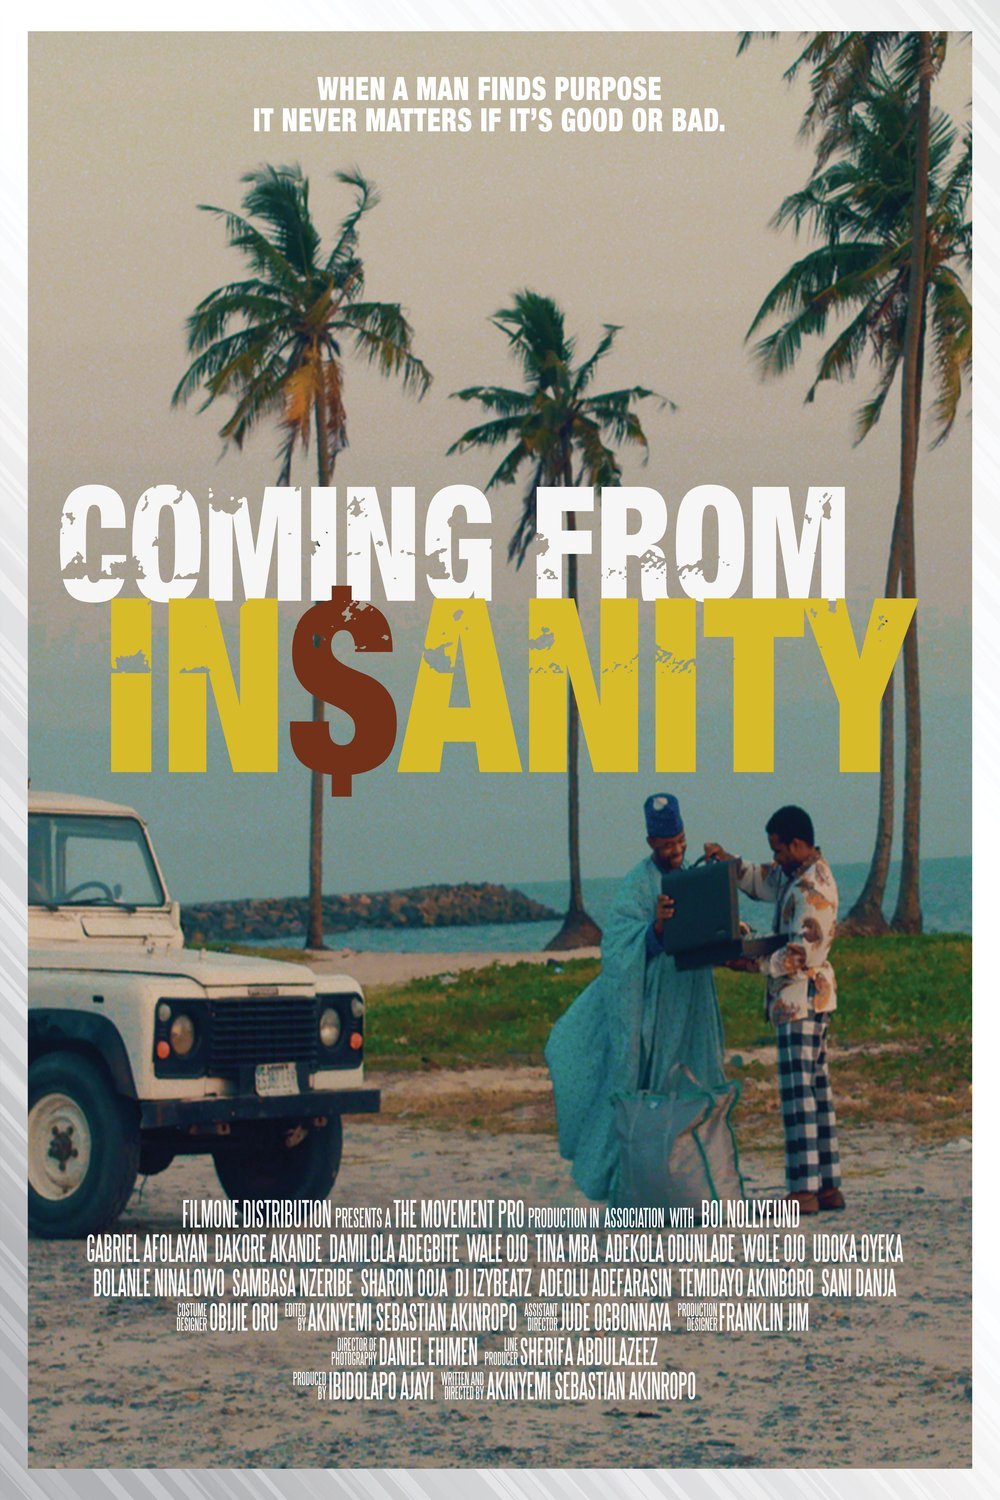 L'affiche du film Coming from Insanity